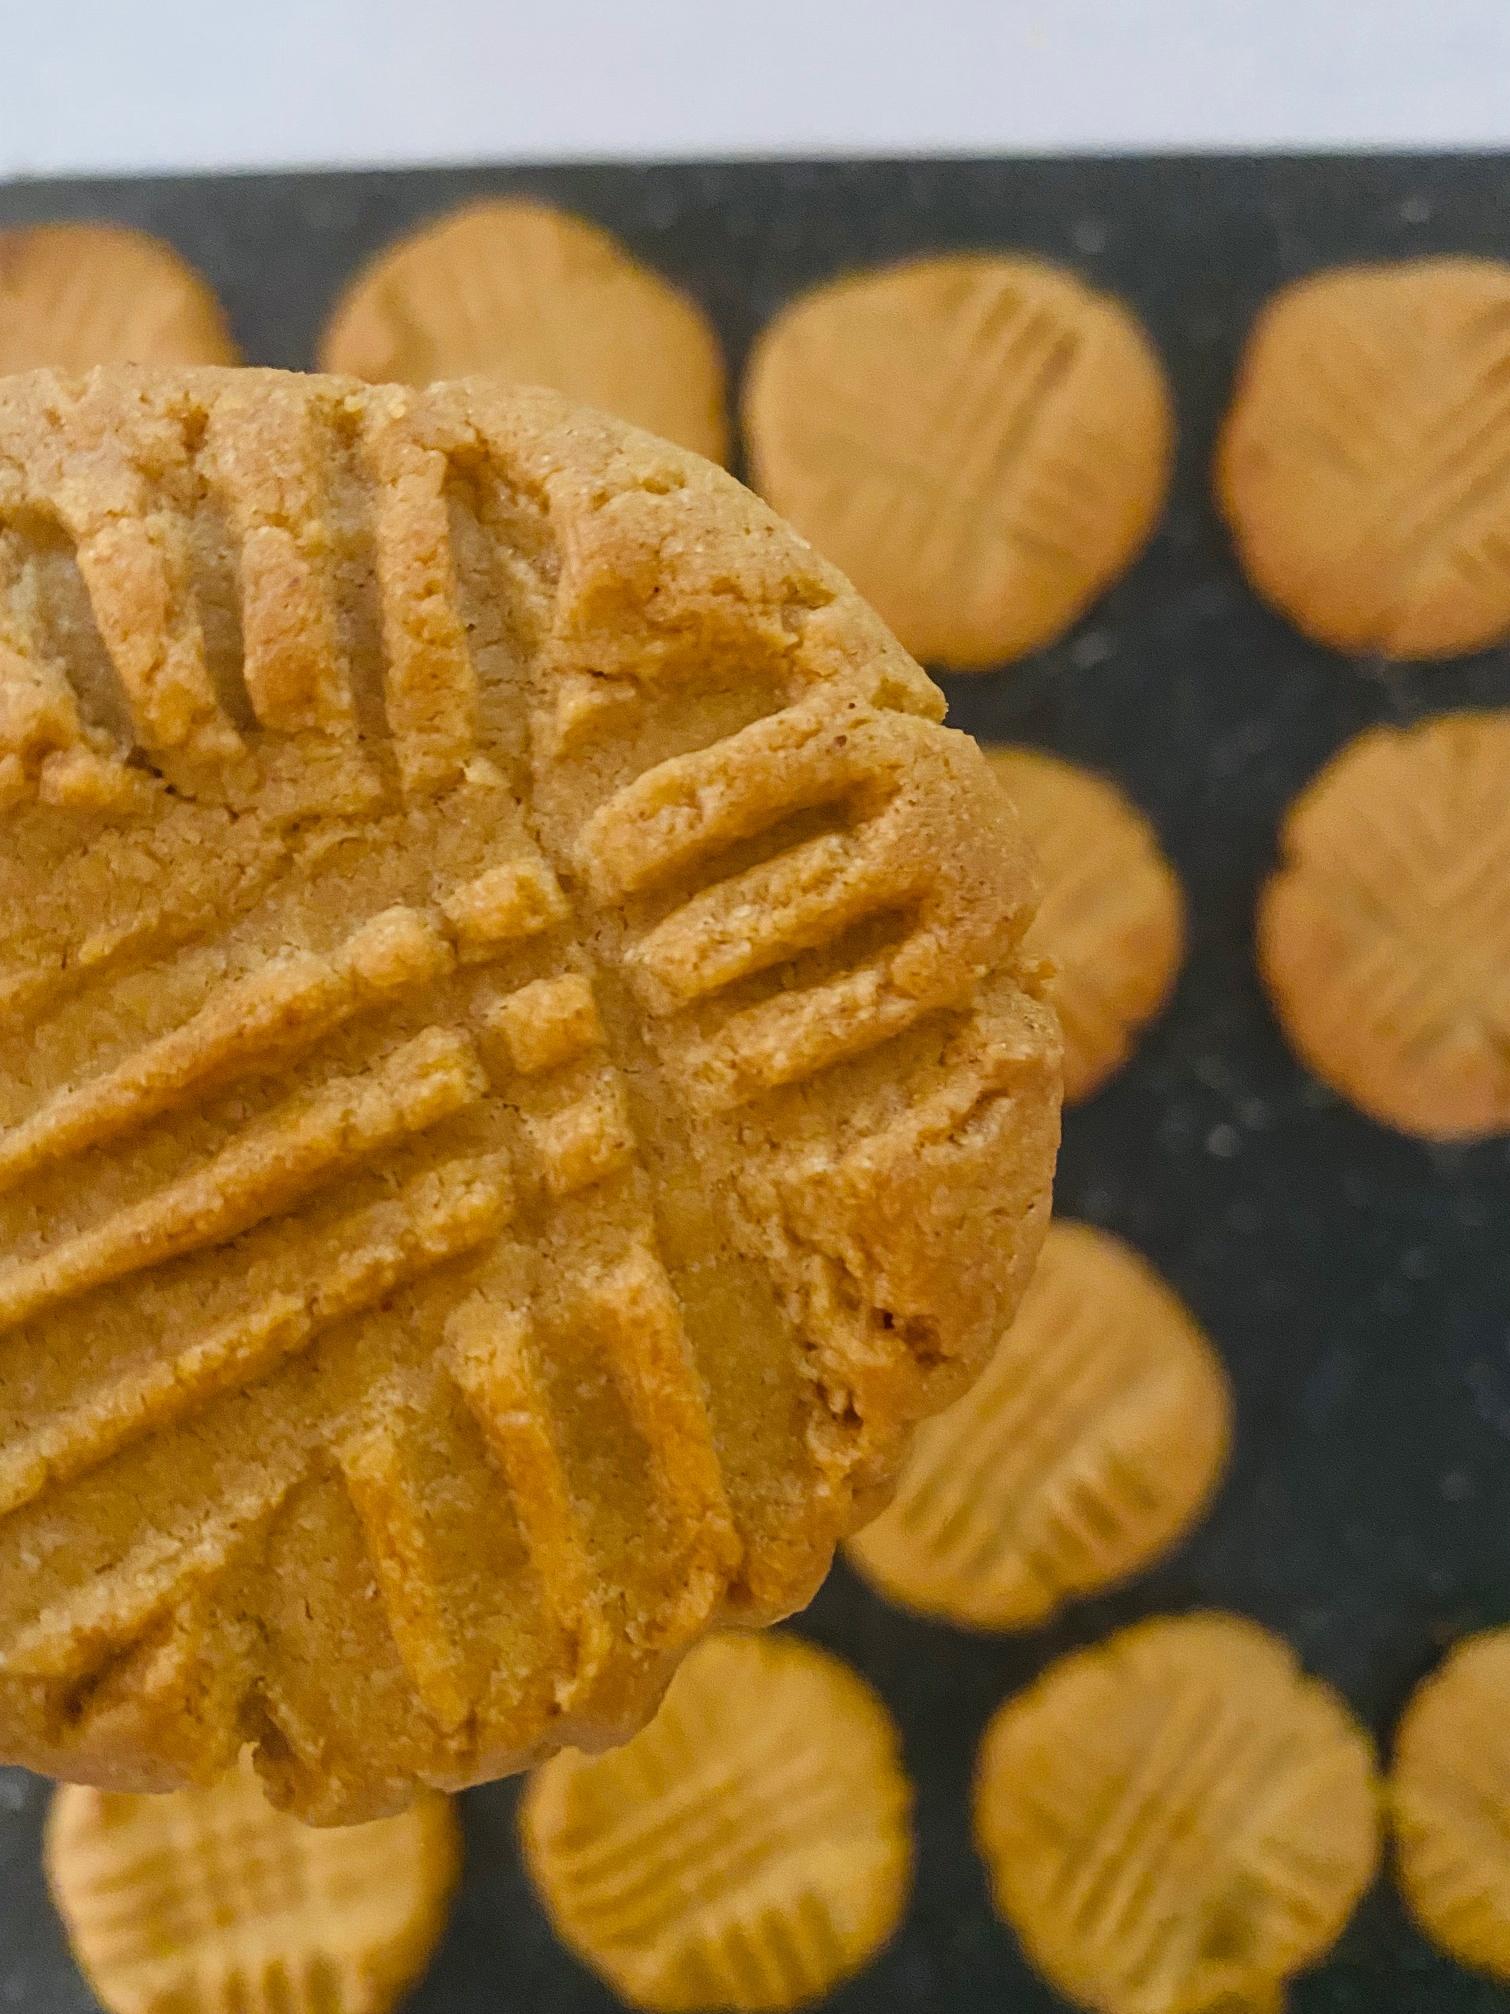  Peanut butter lovers rejoice with these cookies